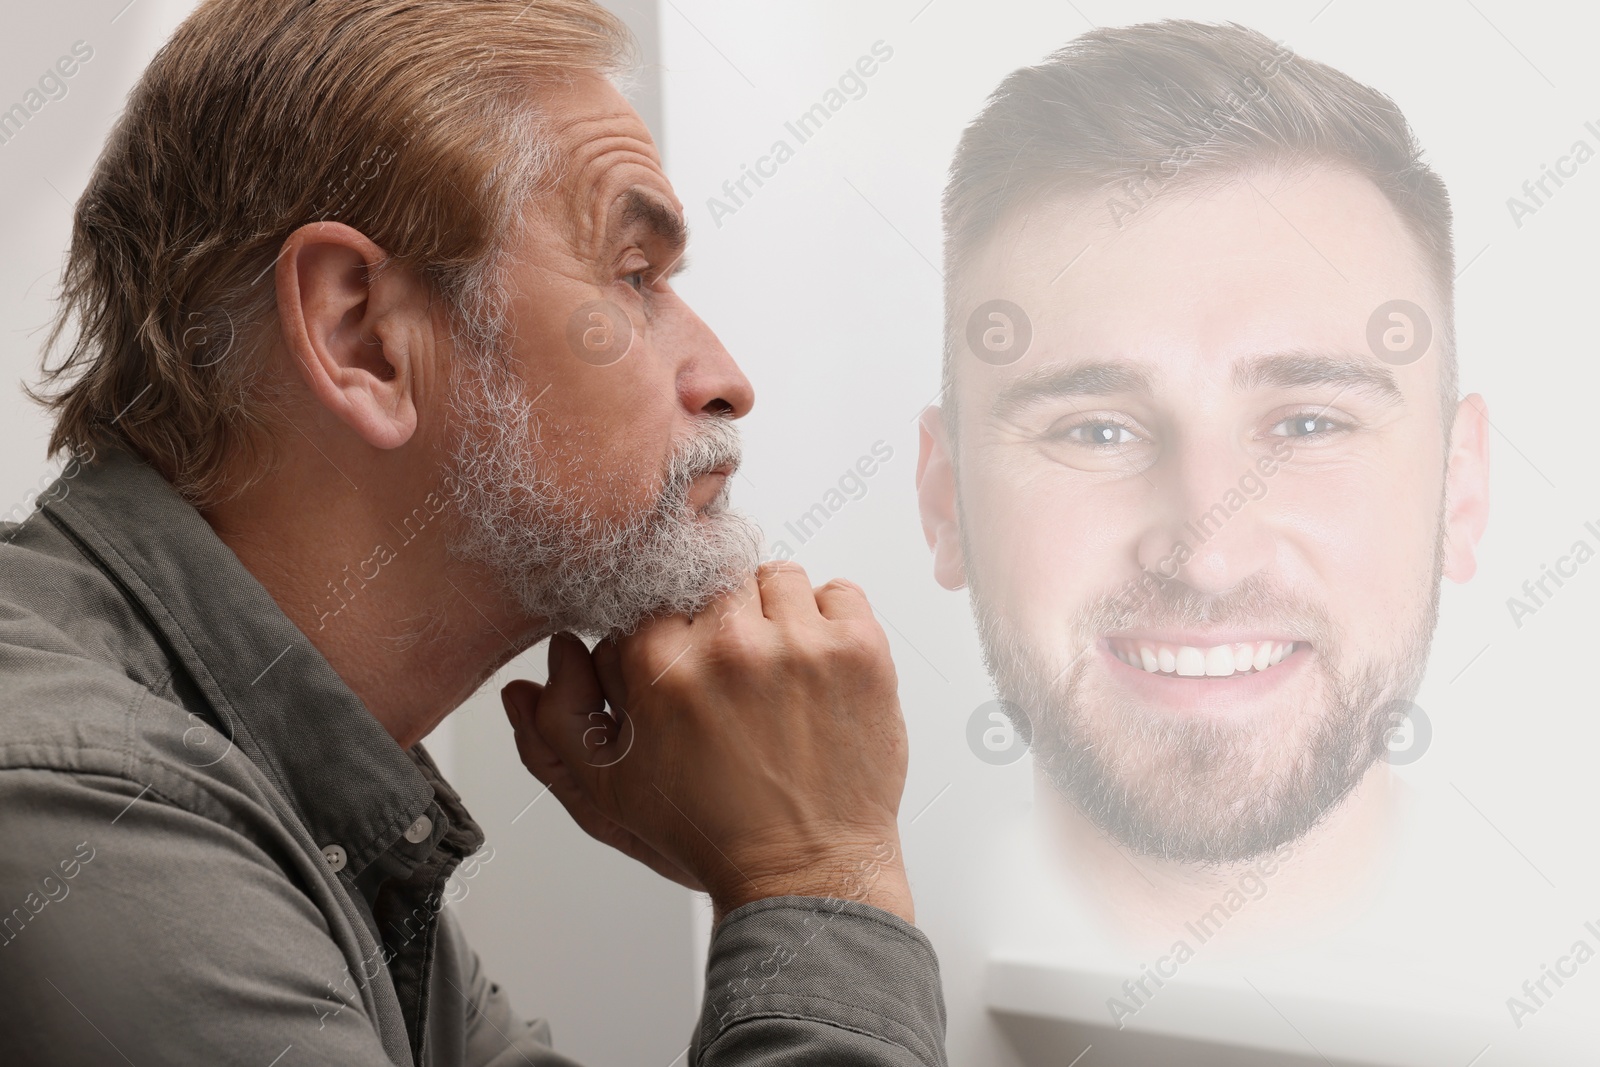 Image of Mature man remembering old times. Translucent picture of young guy showing him in his youth